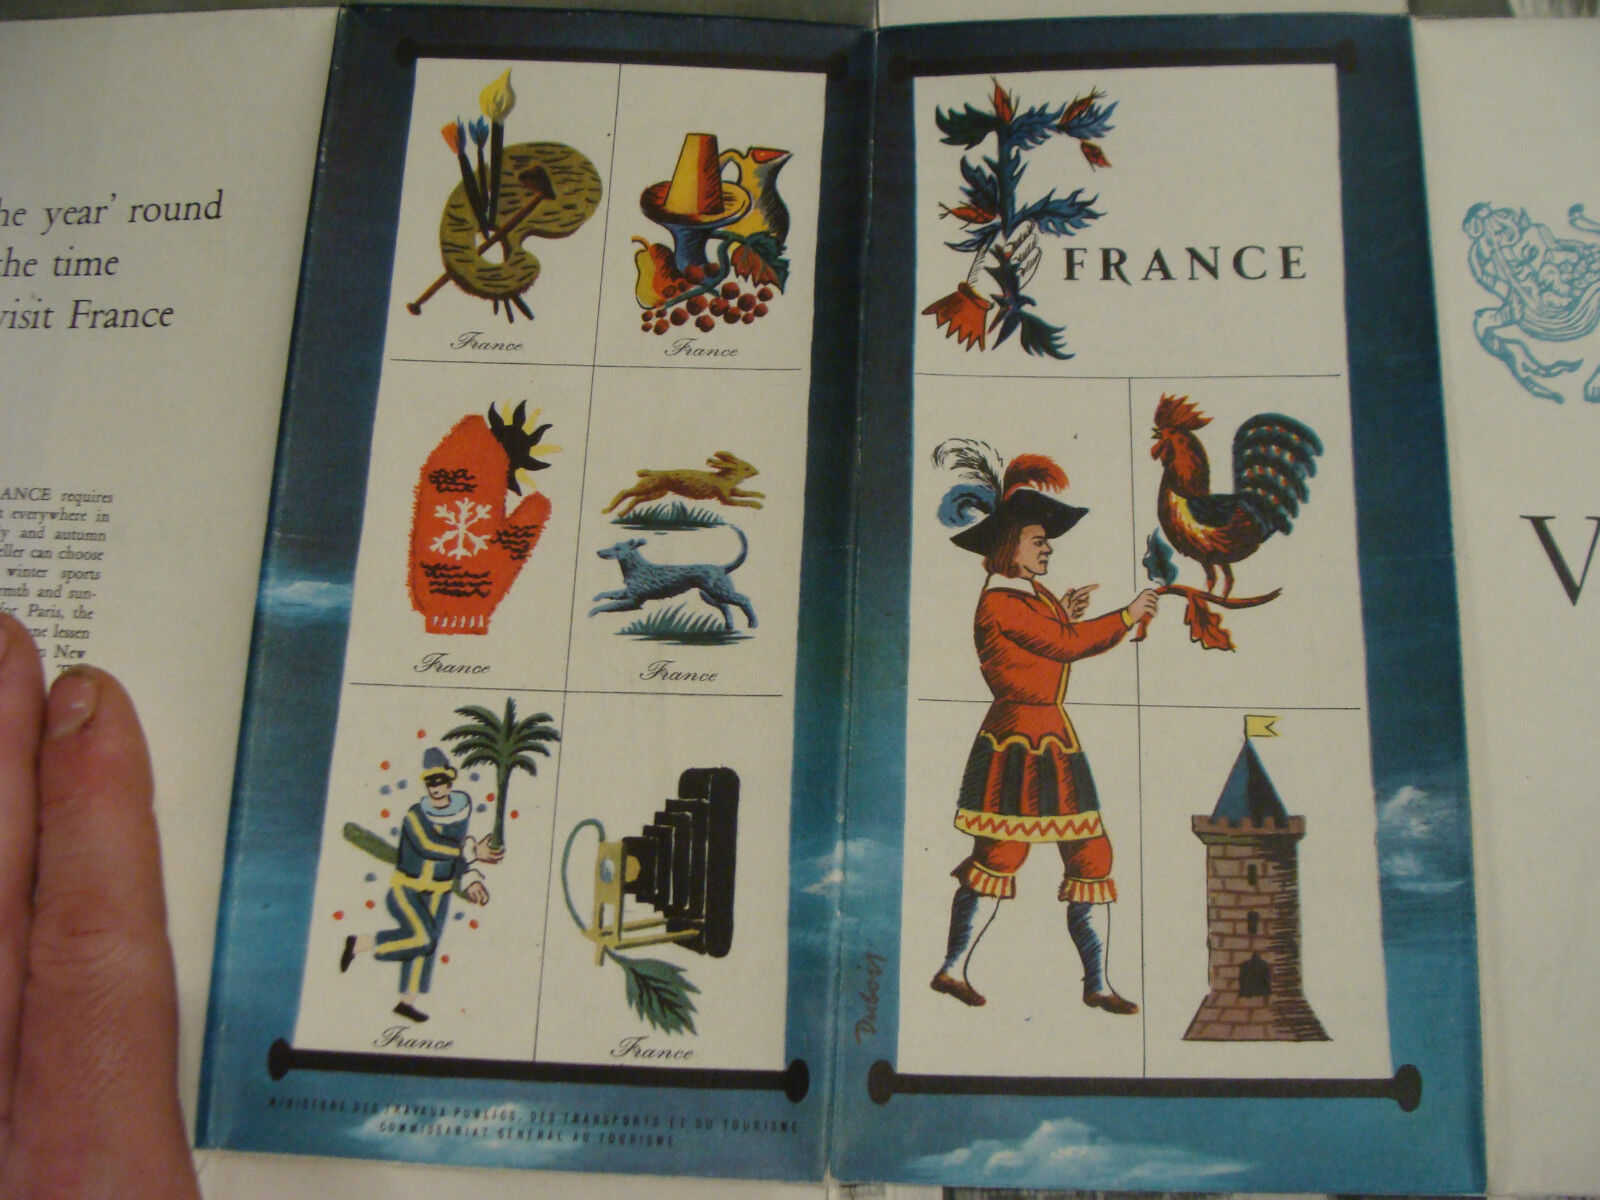  GREAT VINTAGE  brochure: FRANCE w MAP, cover art by DUGOIS some creasing, CLEAN